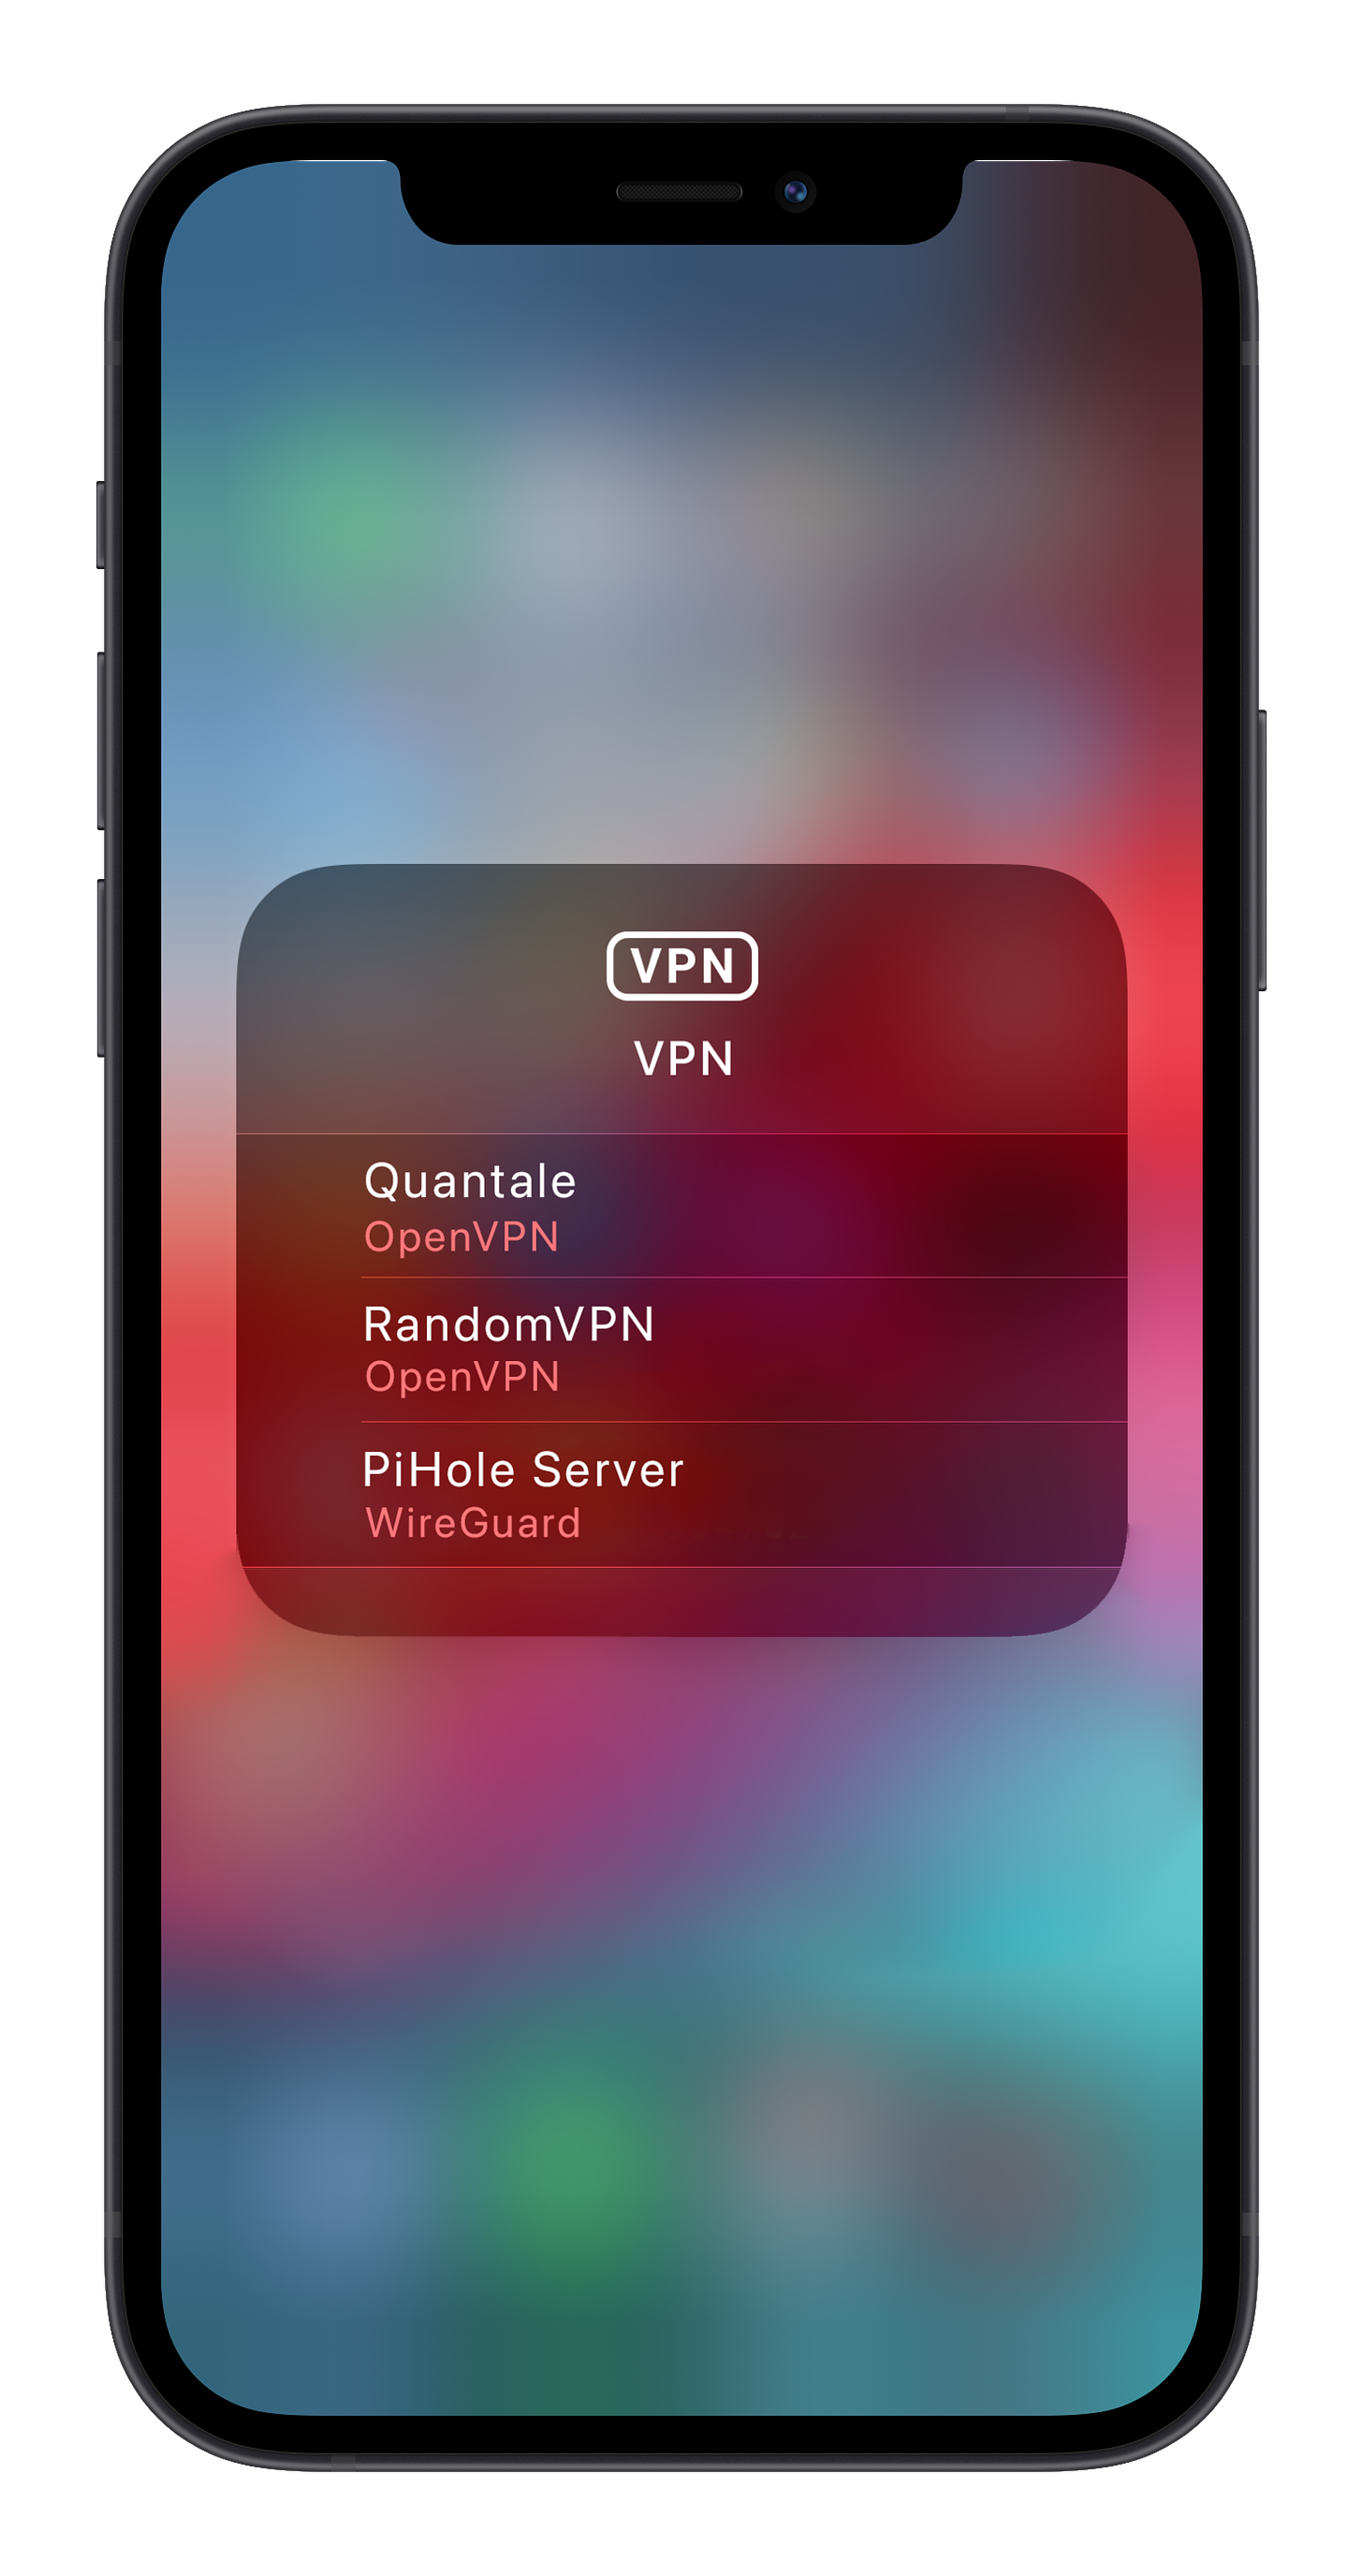 Long press on the VPN icon in Control Center reveals the list of available server